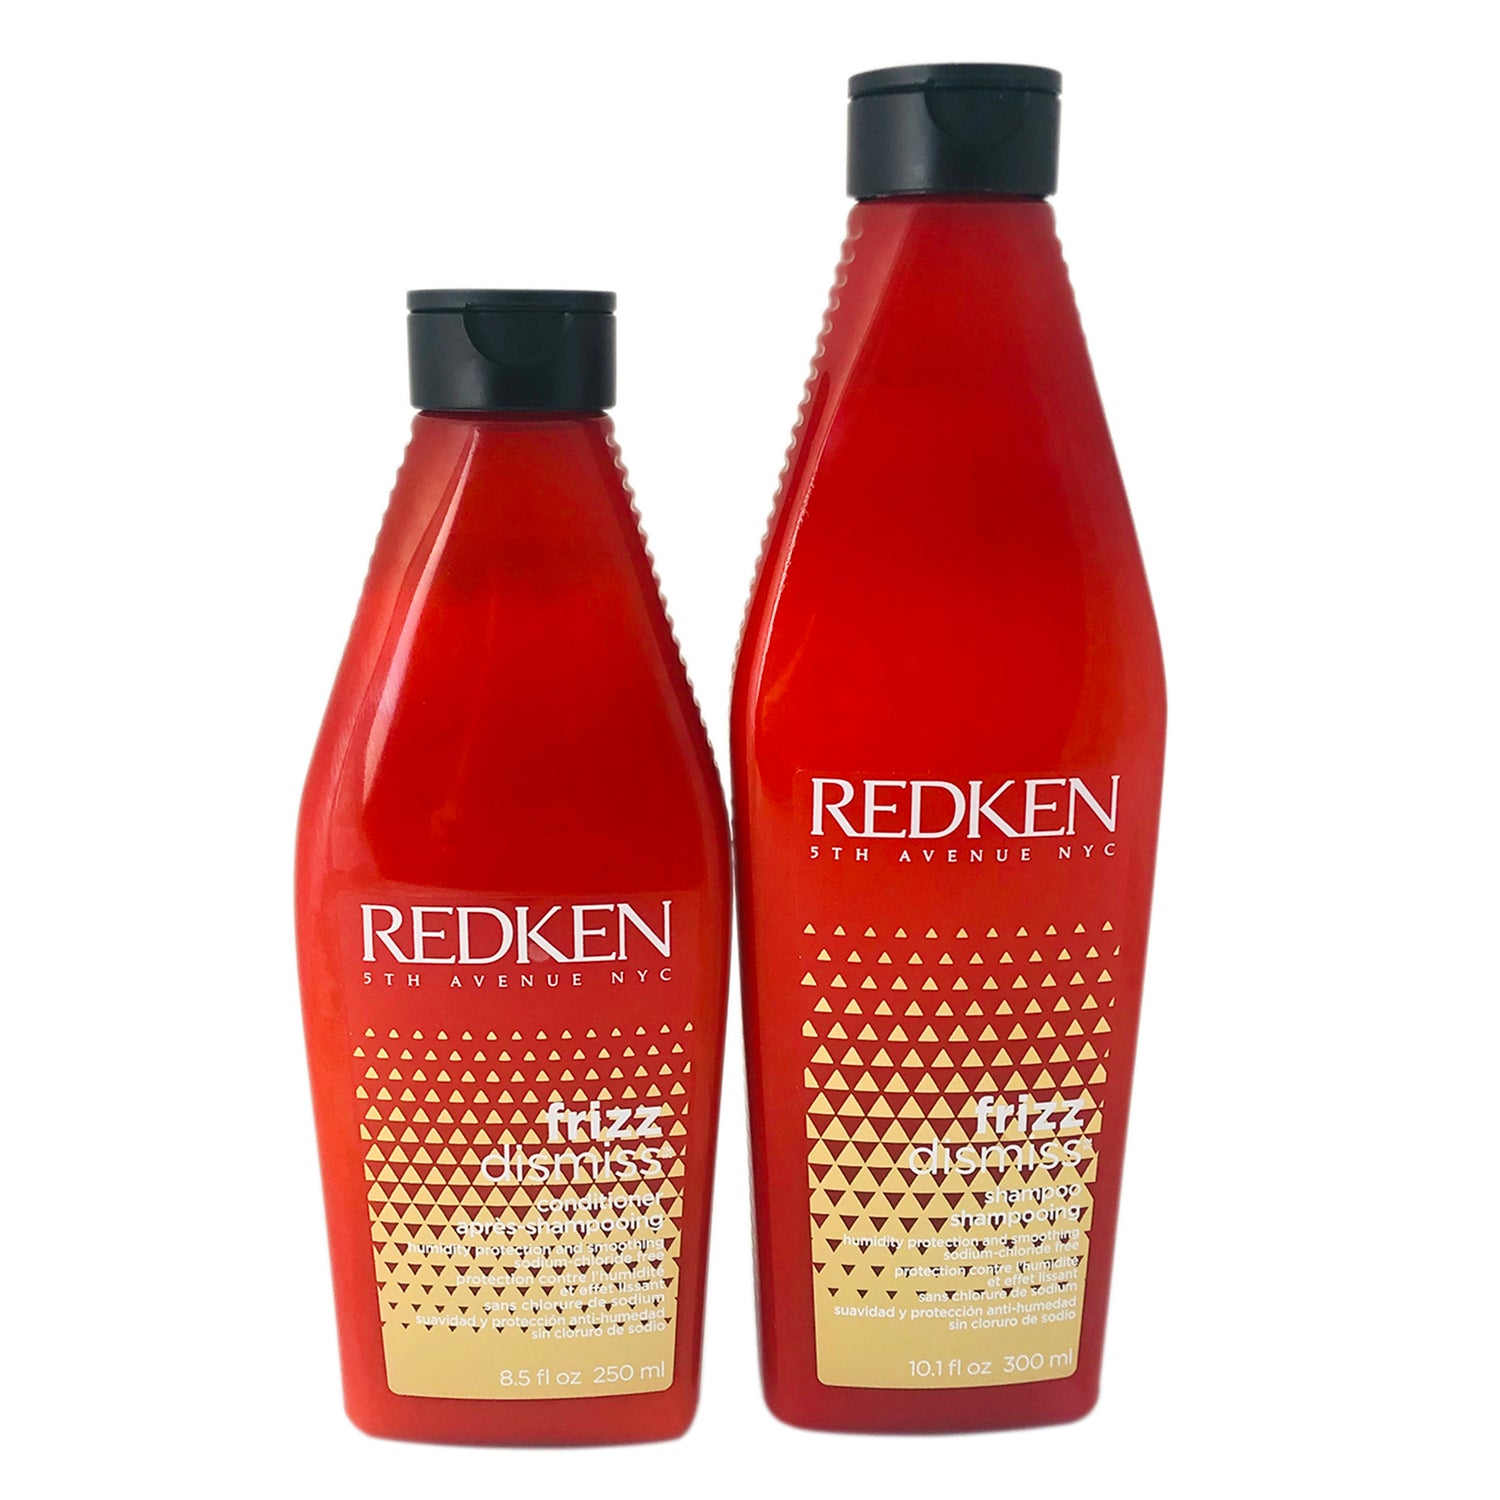 Redken Frizz Dismiss Hair Shampoo 10.1 oz and Conditioner 8.5 oz Duo